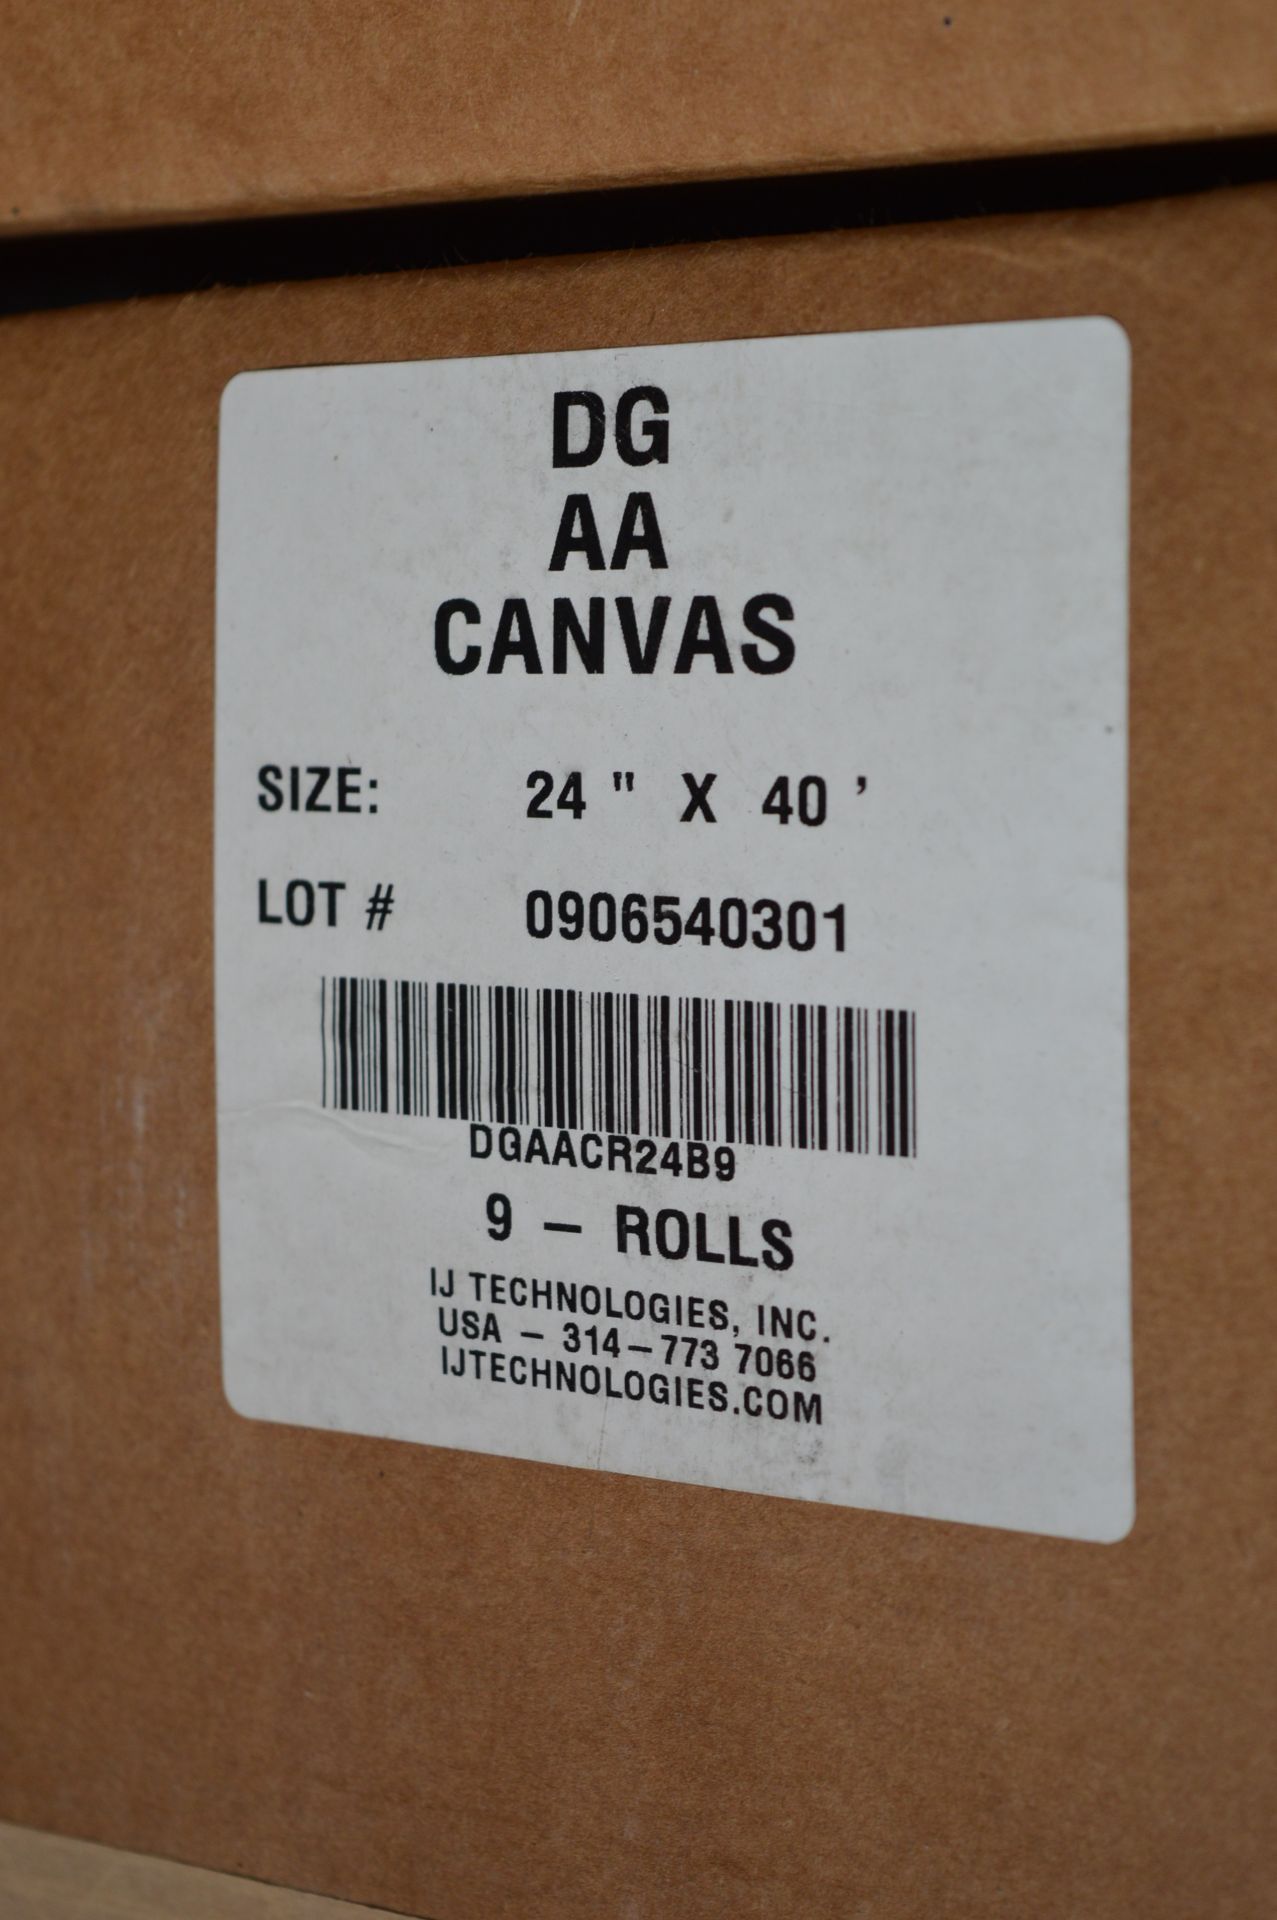 4 x Rolls of IJTechnologies DuraGraphix Textured Canvas - Size 24" x 40' - Engineered to Provide - Image 2 of 2